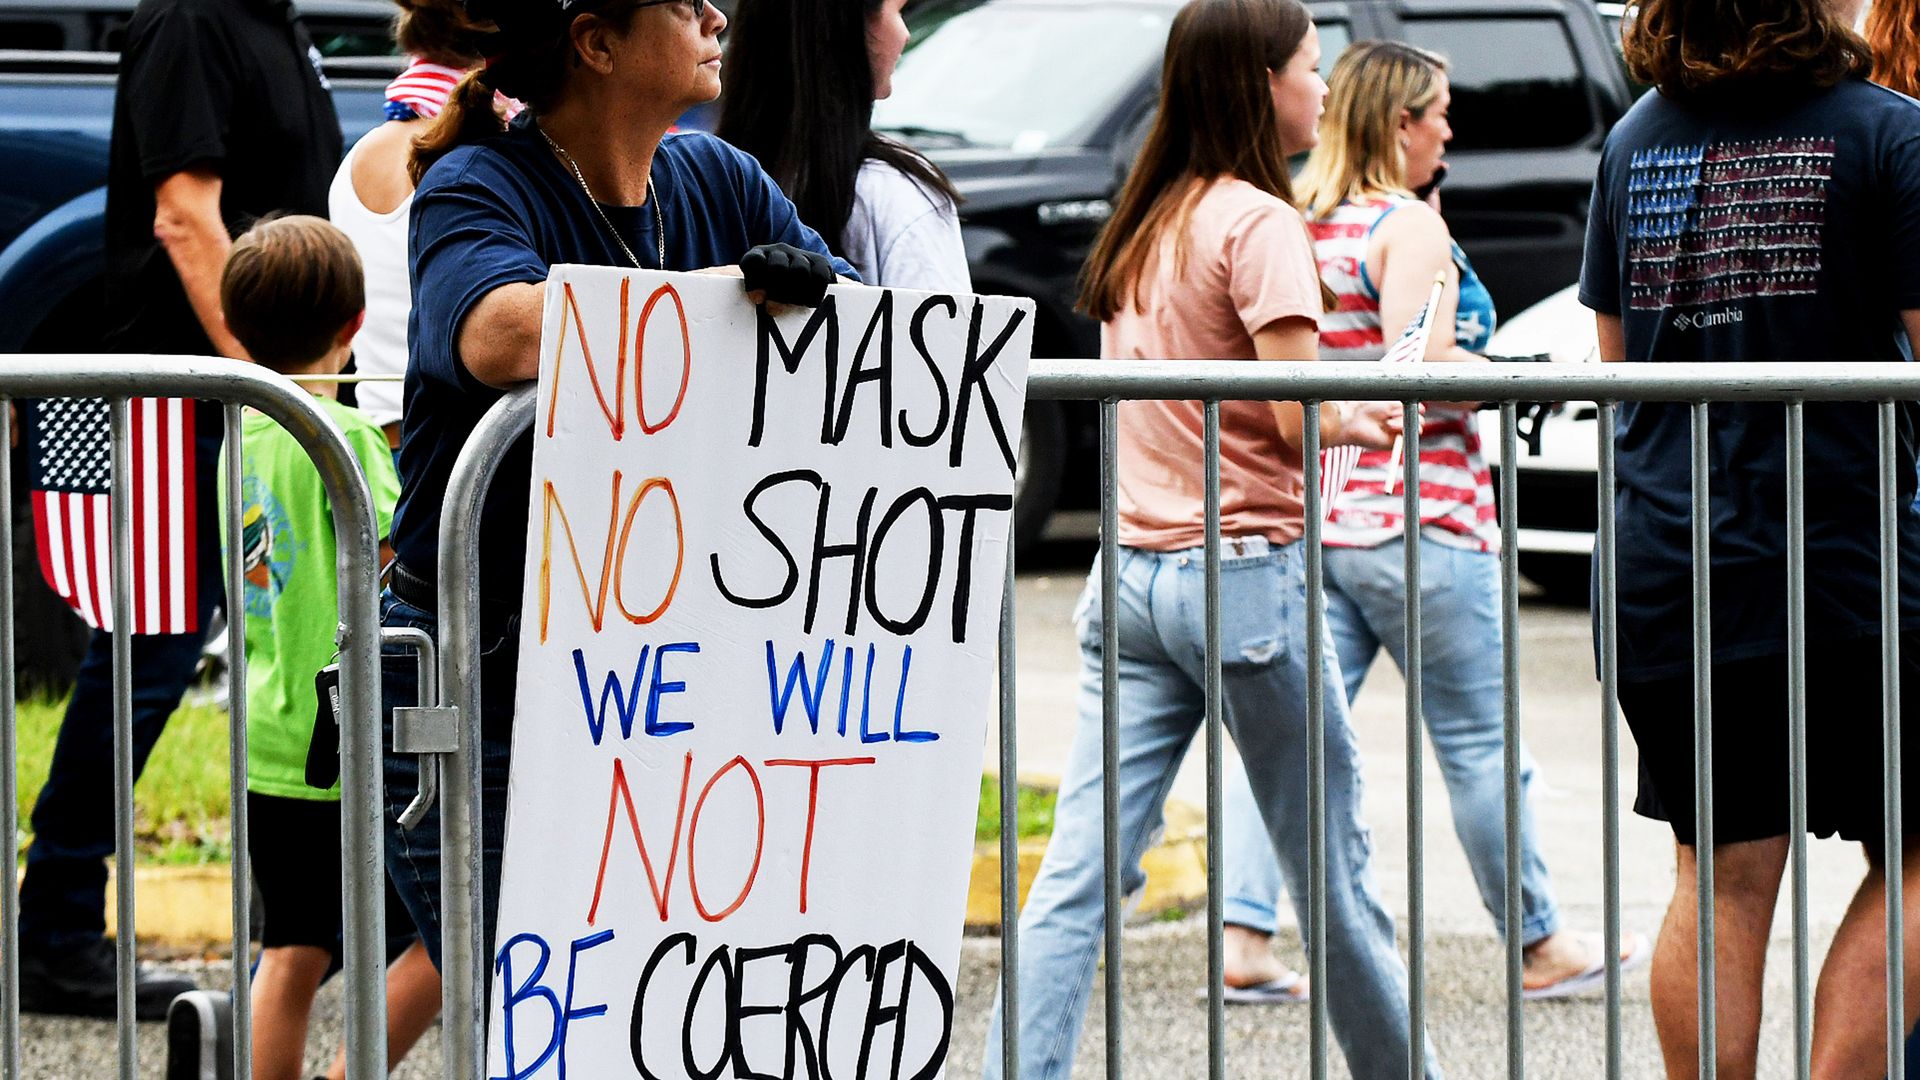 A woman holds an anti-mask placard outside a meeting of the Volusia County School Board in Deland, Florida